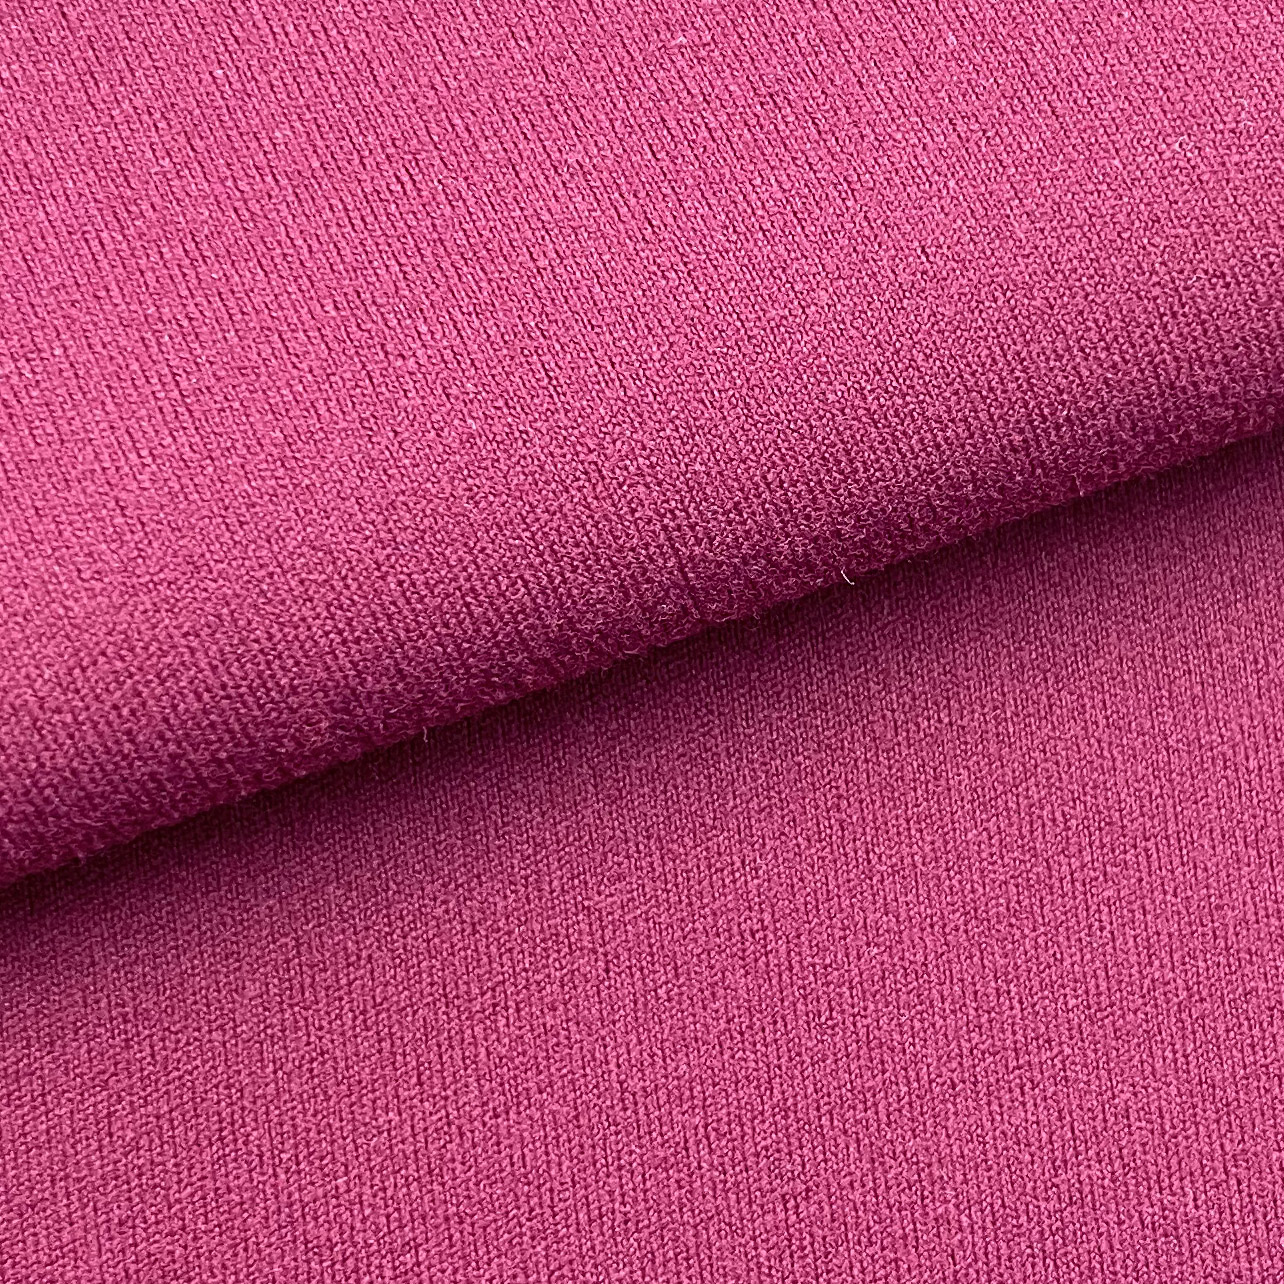 DEEPPINK PEACHED FABRIC